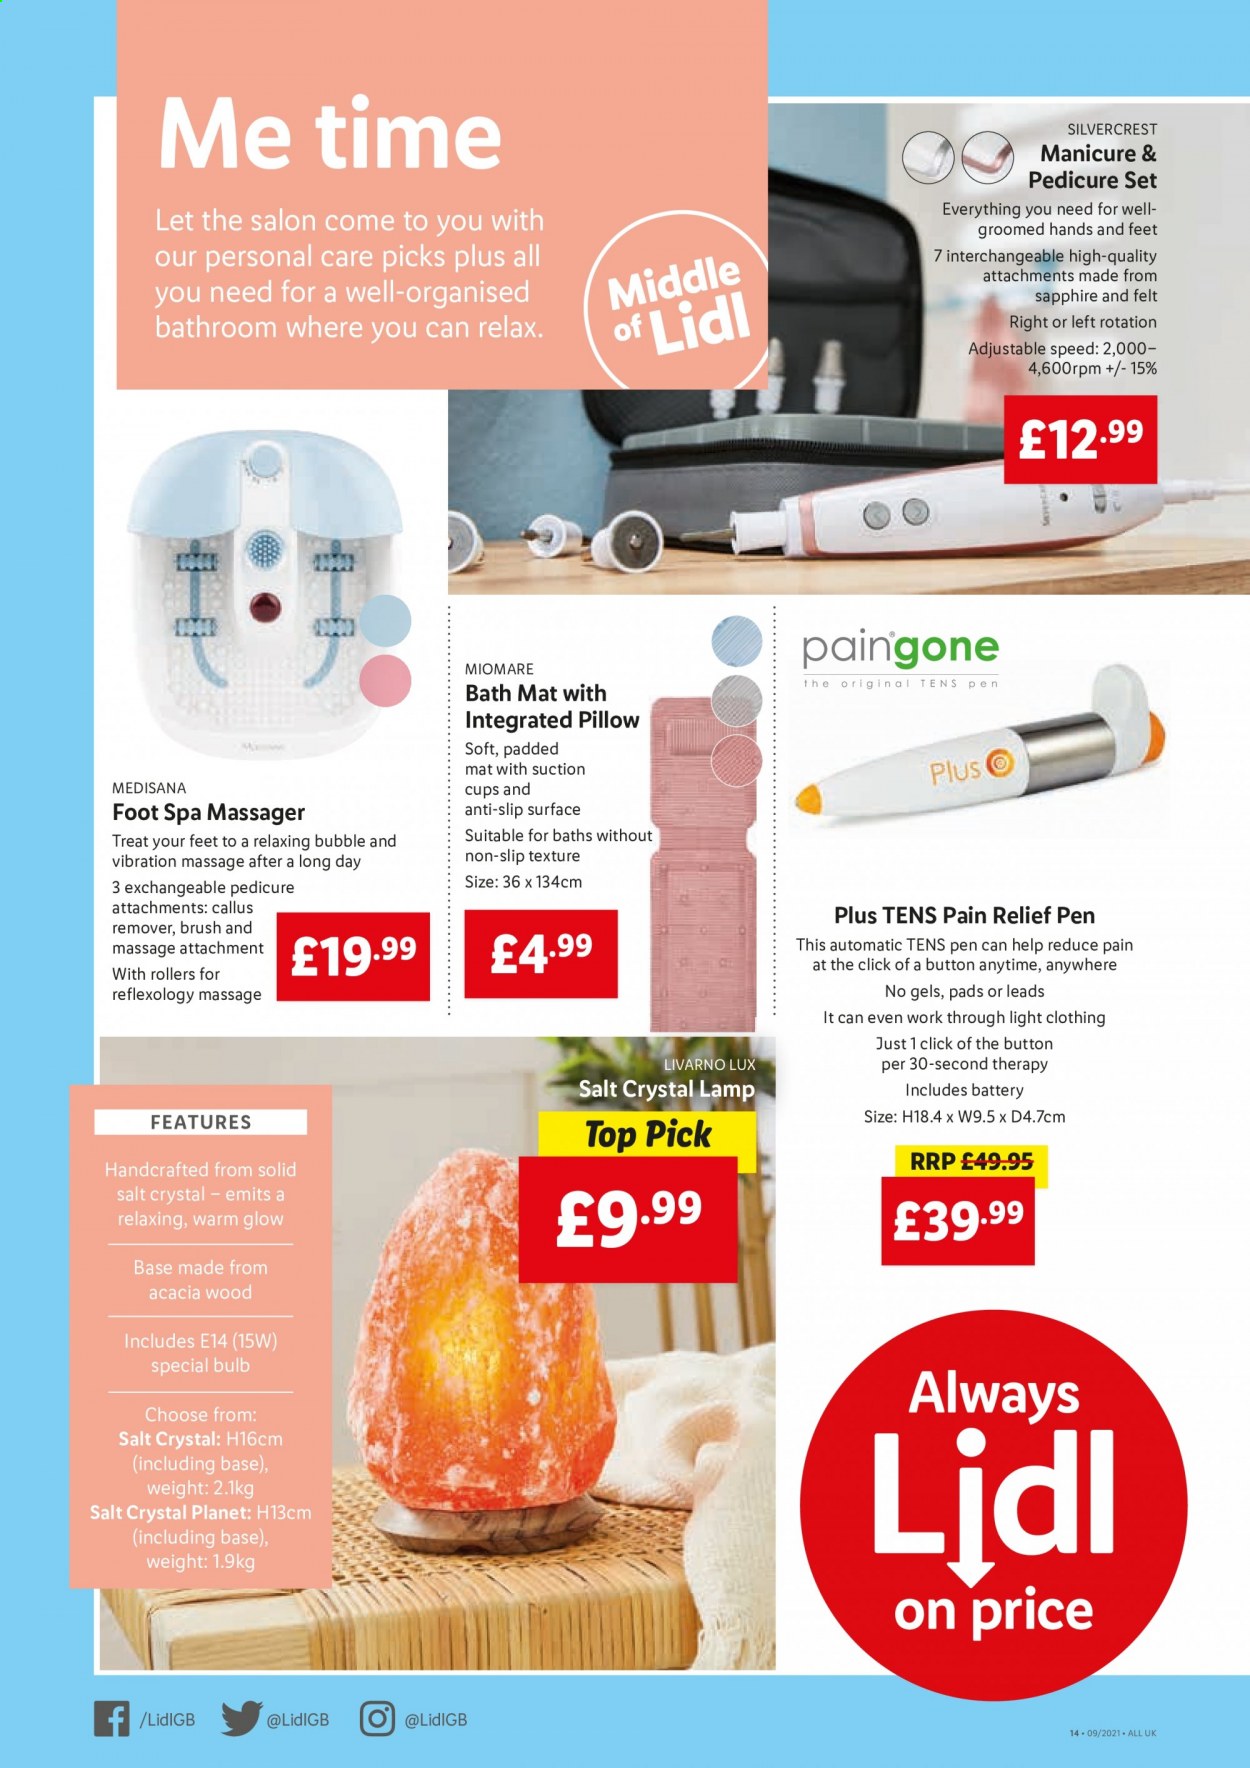 thumbnail - Lidl offer  - 04/03/2021 - 10/03/2021 - Sales products - SilverCrest, salt, Lux, manicure, callus remover, brush, suction cups, cup, pen, battery, bulb, pillow, bath mat, massager, foot spa, lamp, pain relief. Page 12.